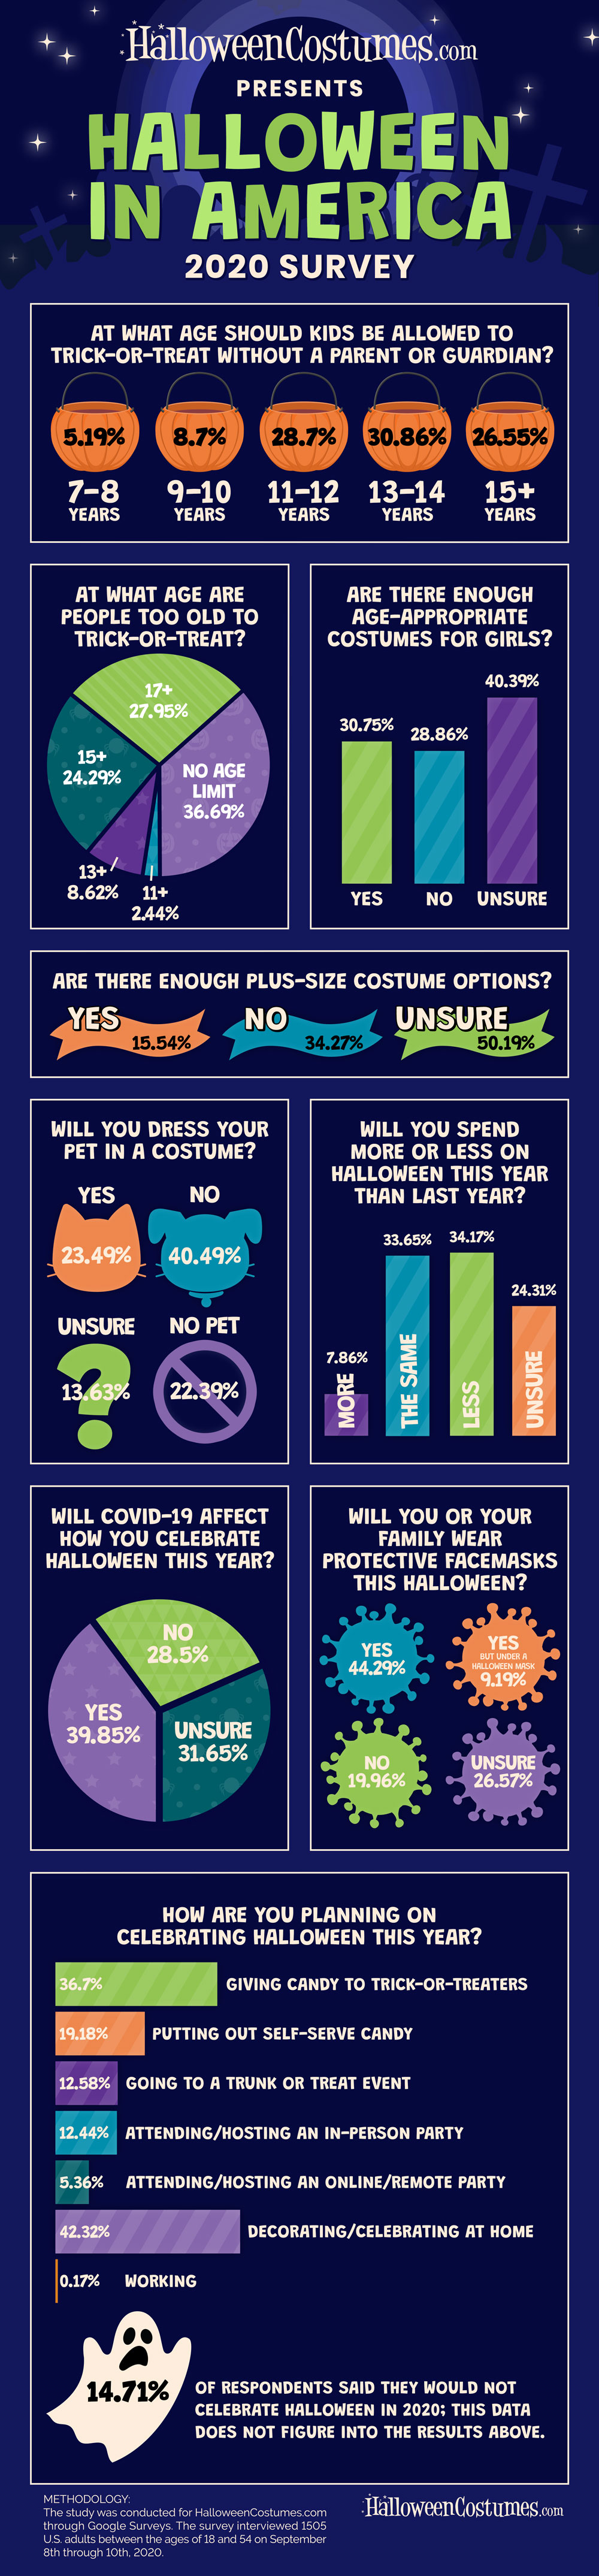 2020 'Halloween in America Survey' Results Infographic